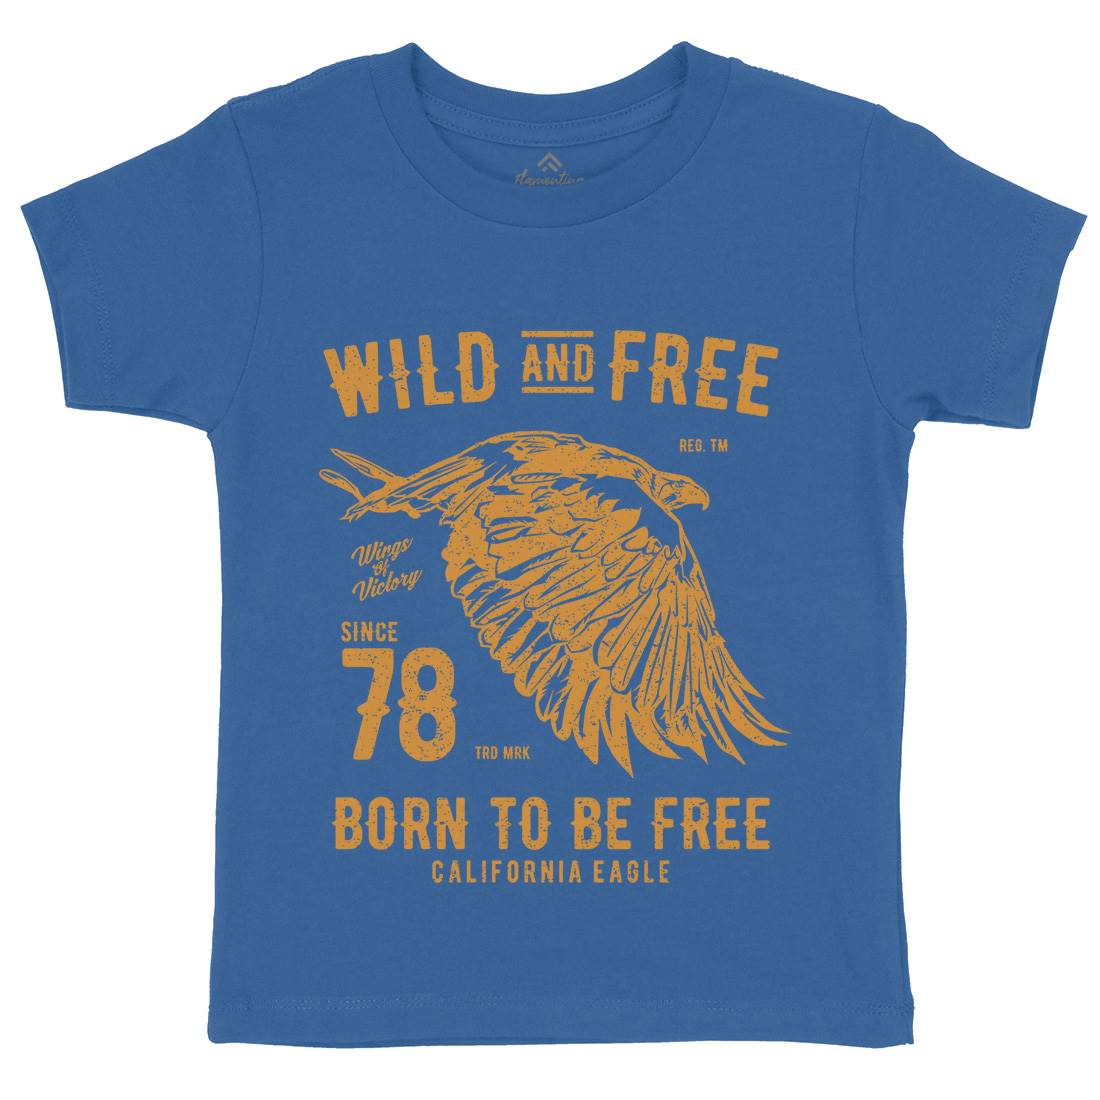 Wild And Free Kids Crew Neck T-Shirt Army A792